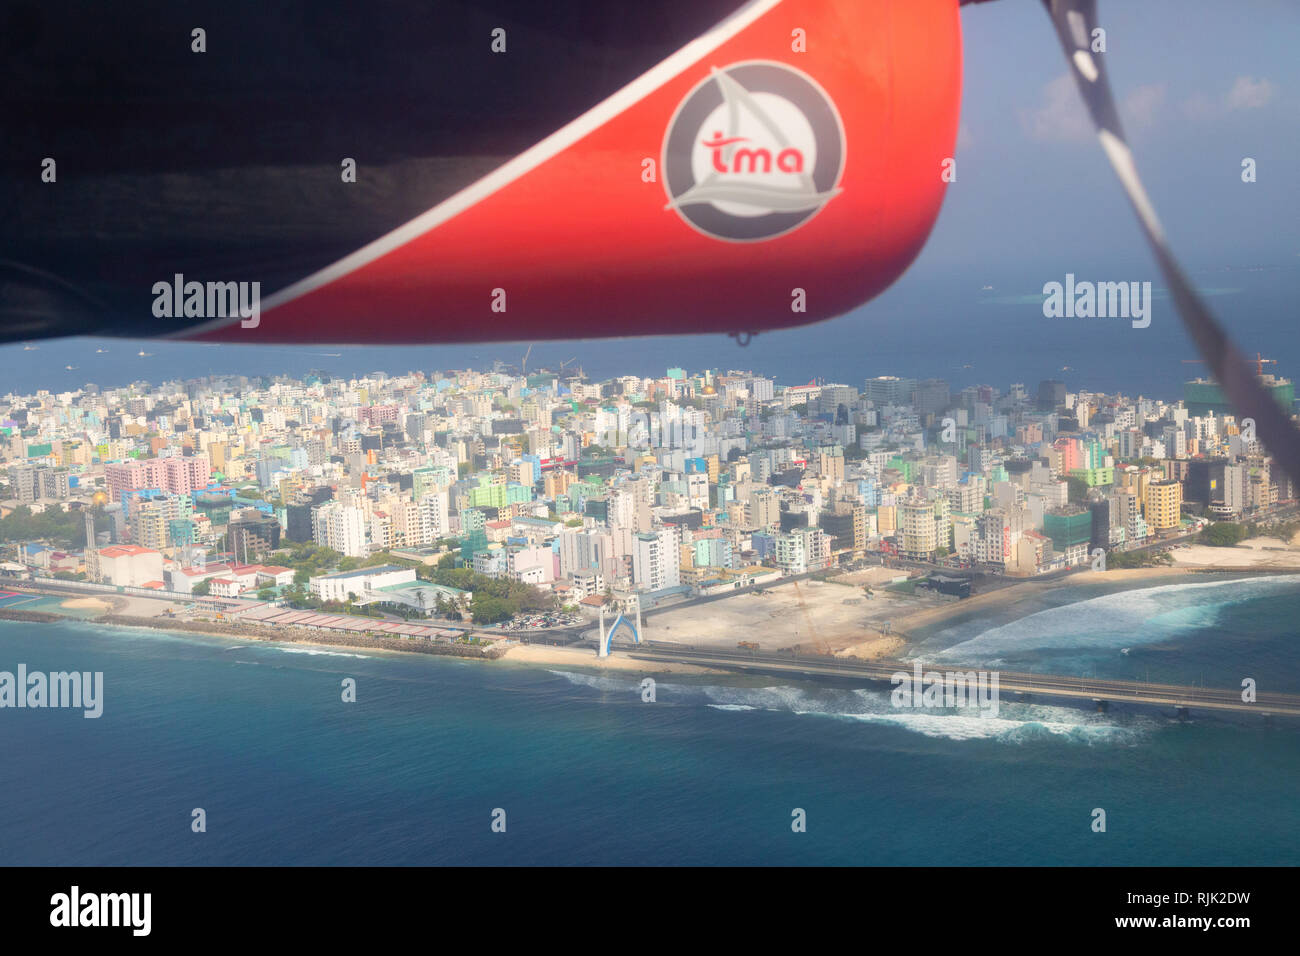 Maldives travel - Male city and island seen from a Trans Maldivian Airways seaplane, the Maldives, Asia Stock Photo